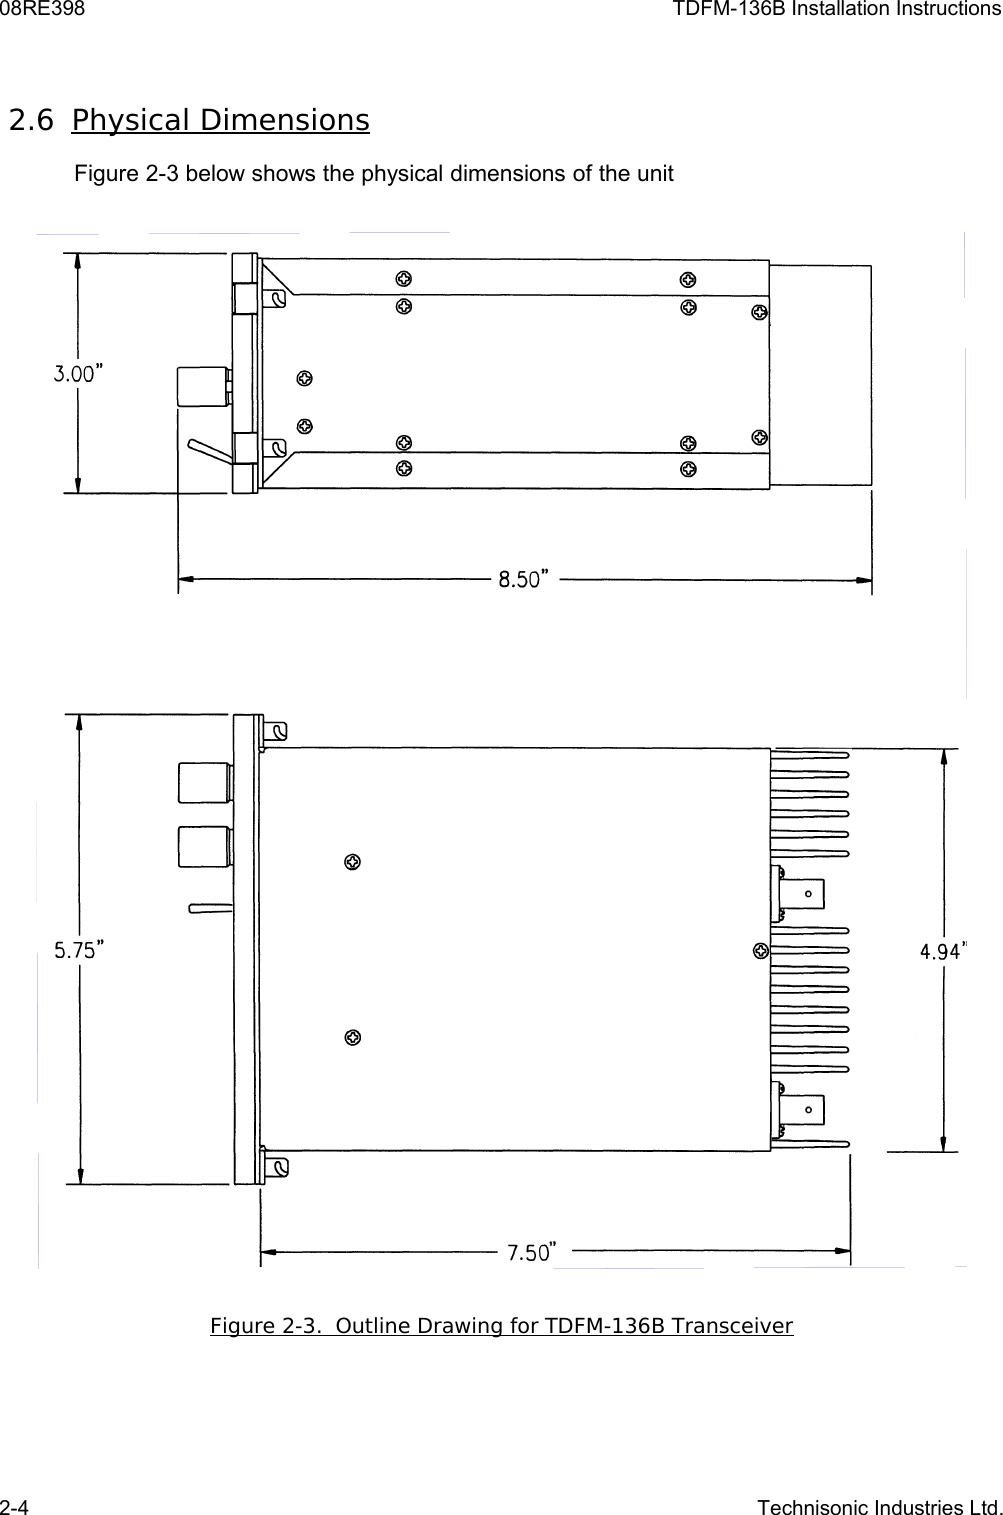 08RE398 TDFM-136B Installation Instructions 2.6  Physical Dimensions   Figure 2-3 below shows the physical dimensions of the unitFigure 2-3.  Outline Drawing for TDFM-136B Transceiver2-4 Technisonic Industries Ltd.